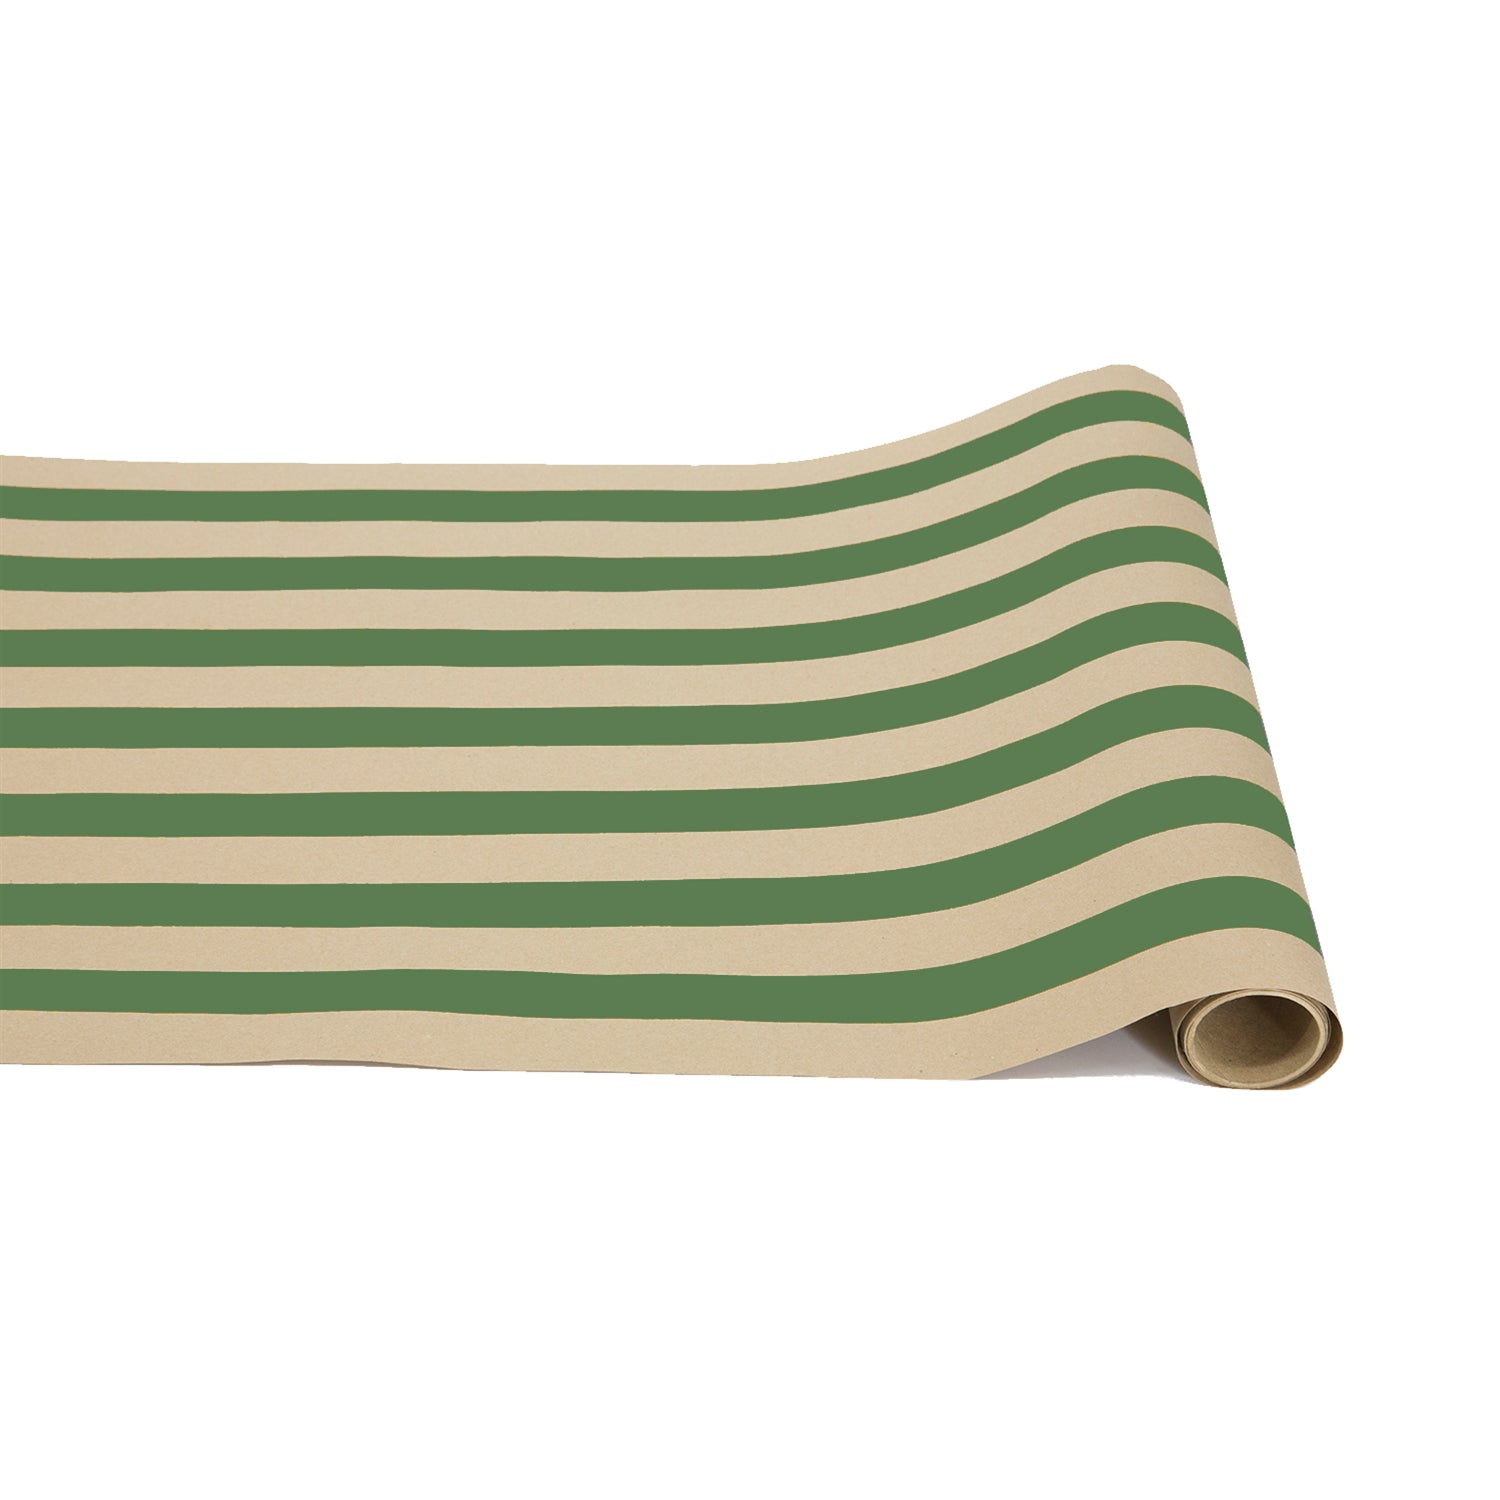 A paper roll with thick dark green and kraft stripes running down the length.